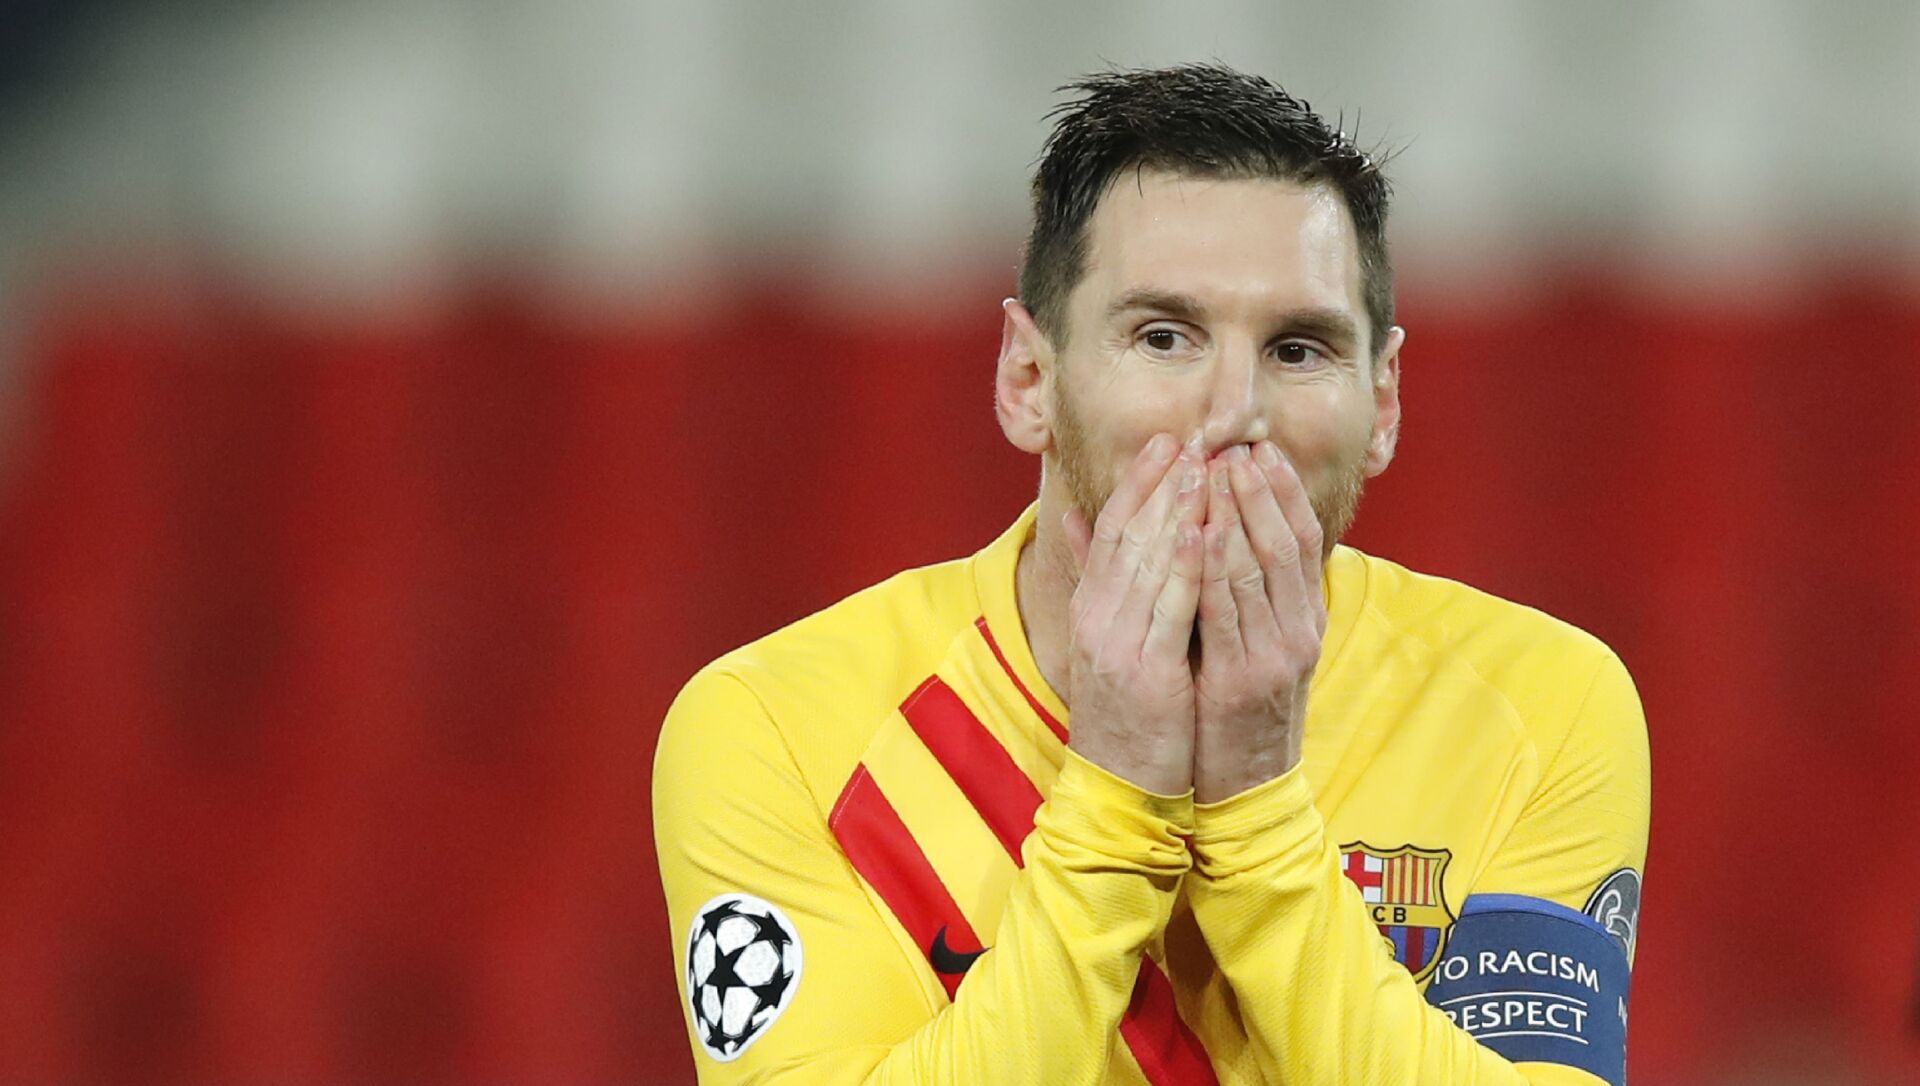 Barcelona's Lionel Messi reacts after a missed a penalty shot during the Champions League, round of 16, second leg soccer match between Paris Saint-Germain and FC Barcelona at the Parc des Princes stadium in Paris on Wednesday, March 10, 2021 - اسپوتنیک افغانستان  , 1920, 08.08.2021